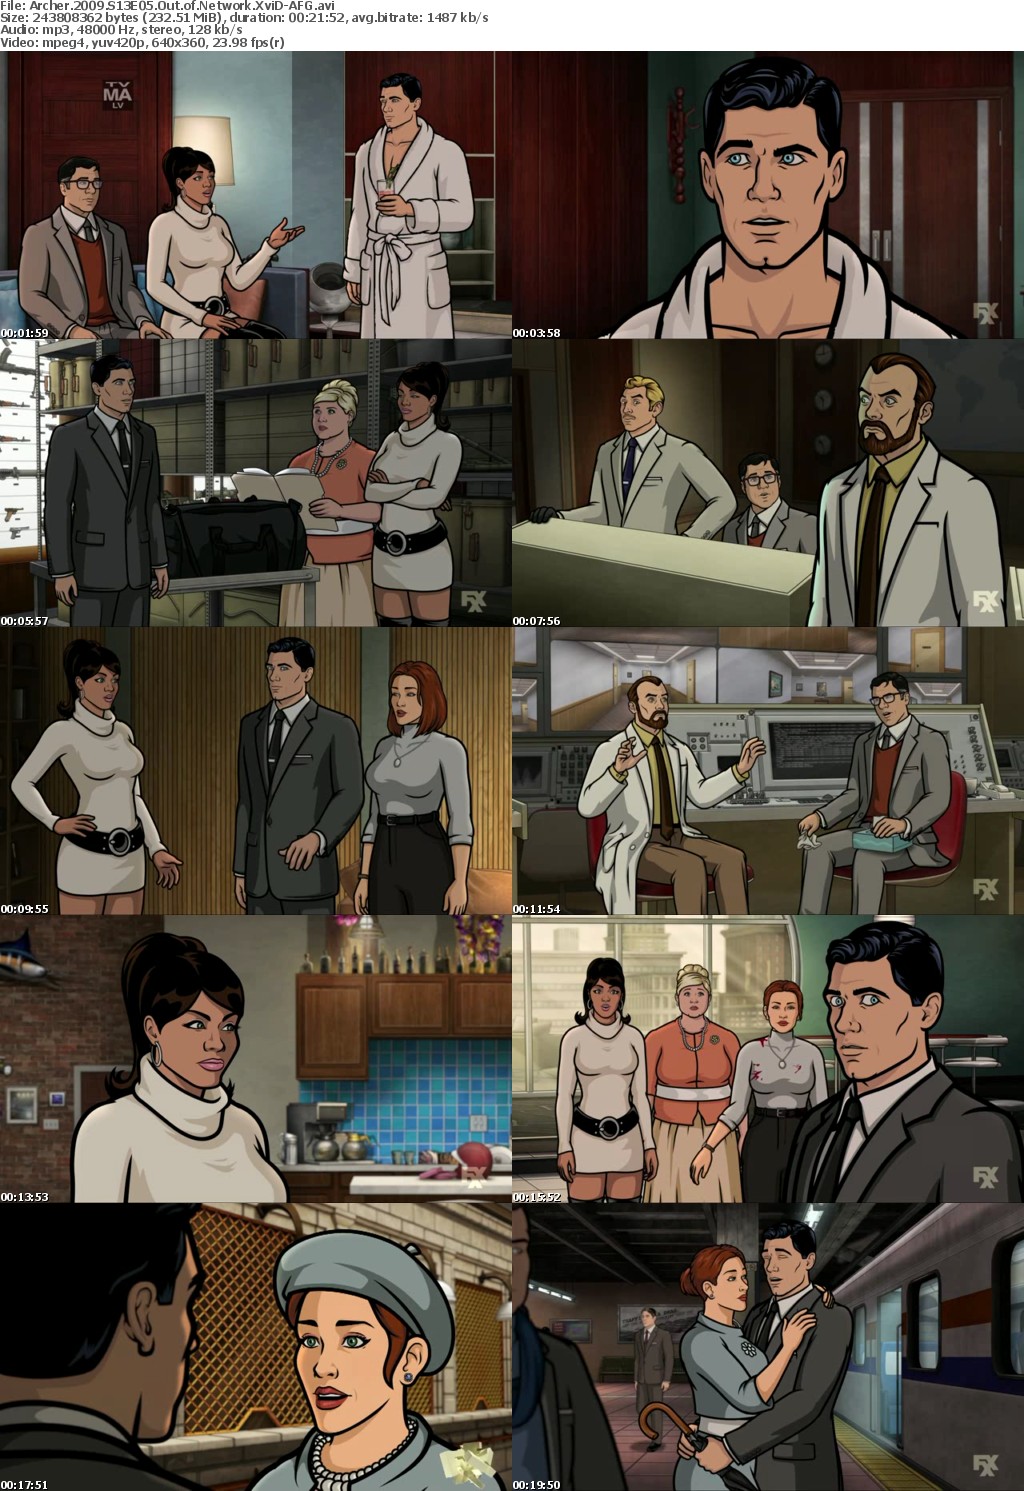 Archer 2009 S13E05 Out of Network XviD-AFG